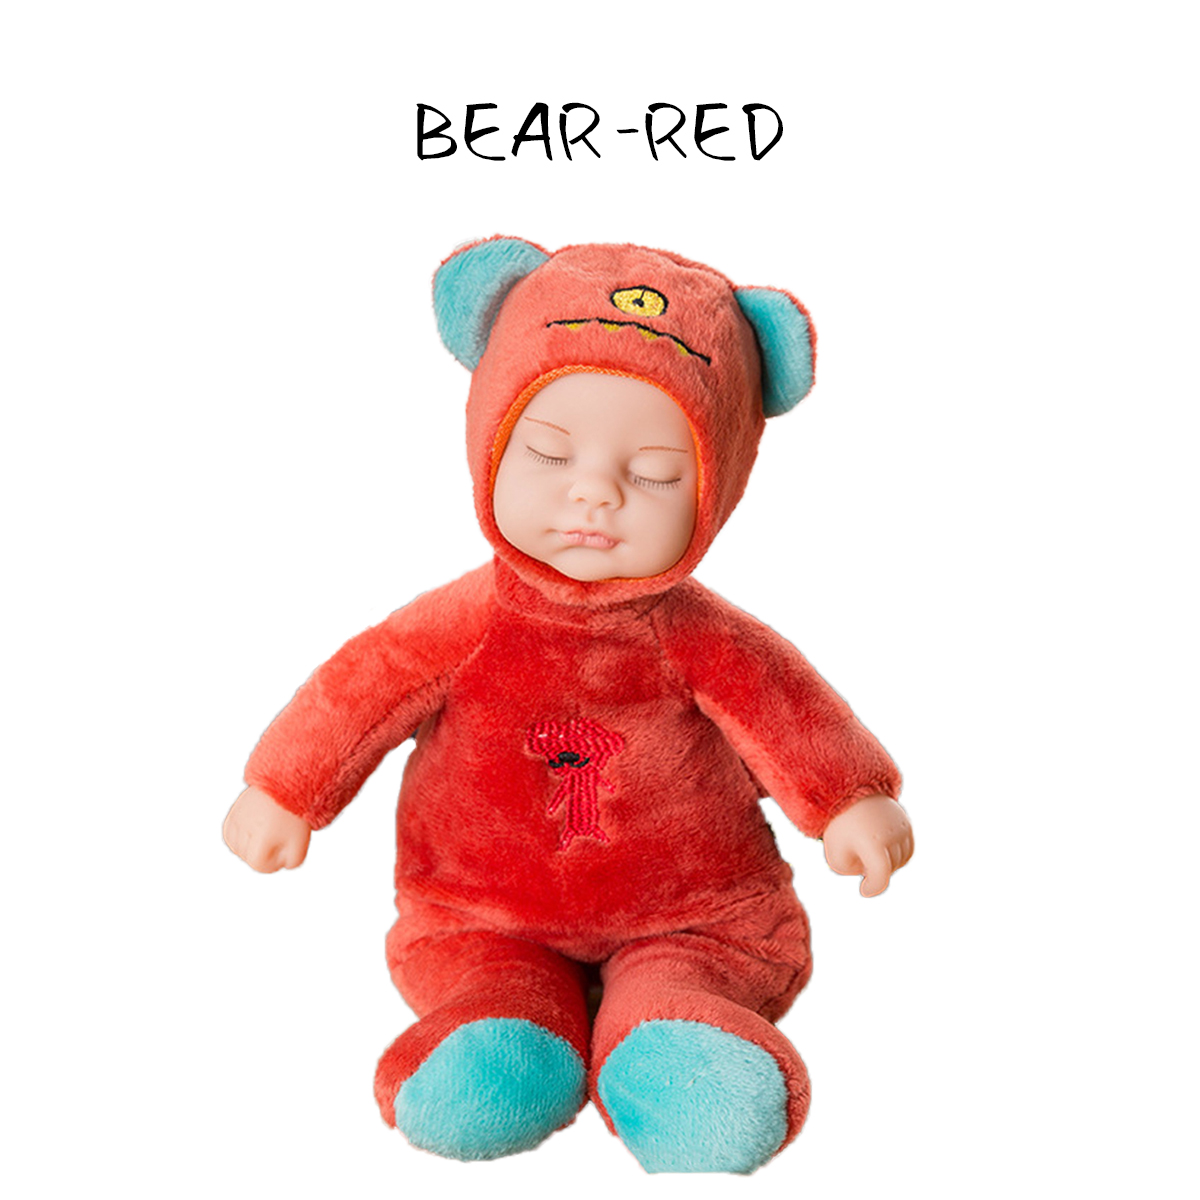 23CM-Soft-Silicone-Vinyl-Lifelike-Realistic-Reborn-Cute-Bear-Rabbit-Doll-Toy-with-Clothes-1722622-6